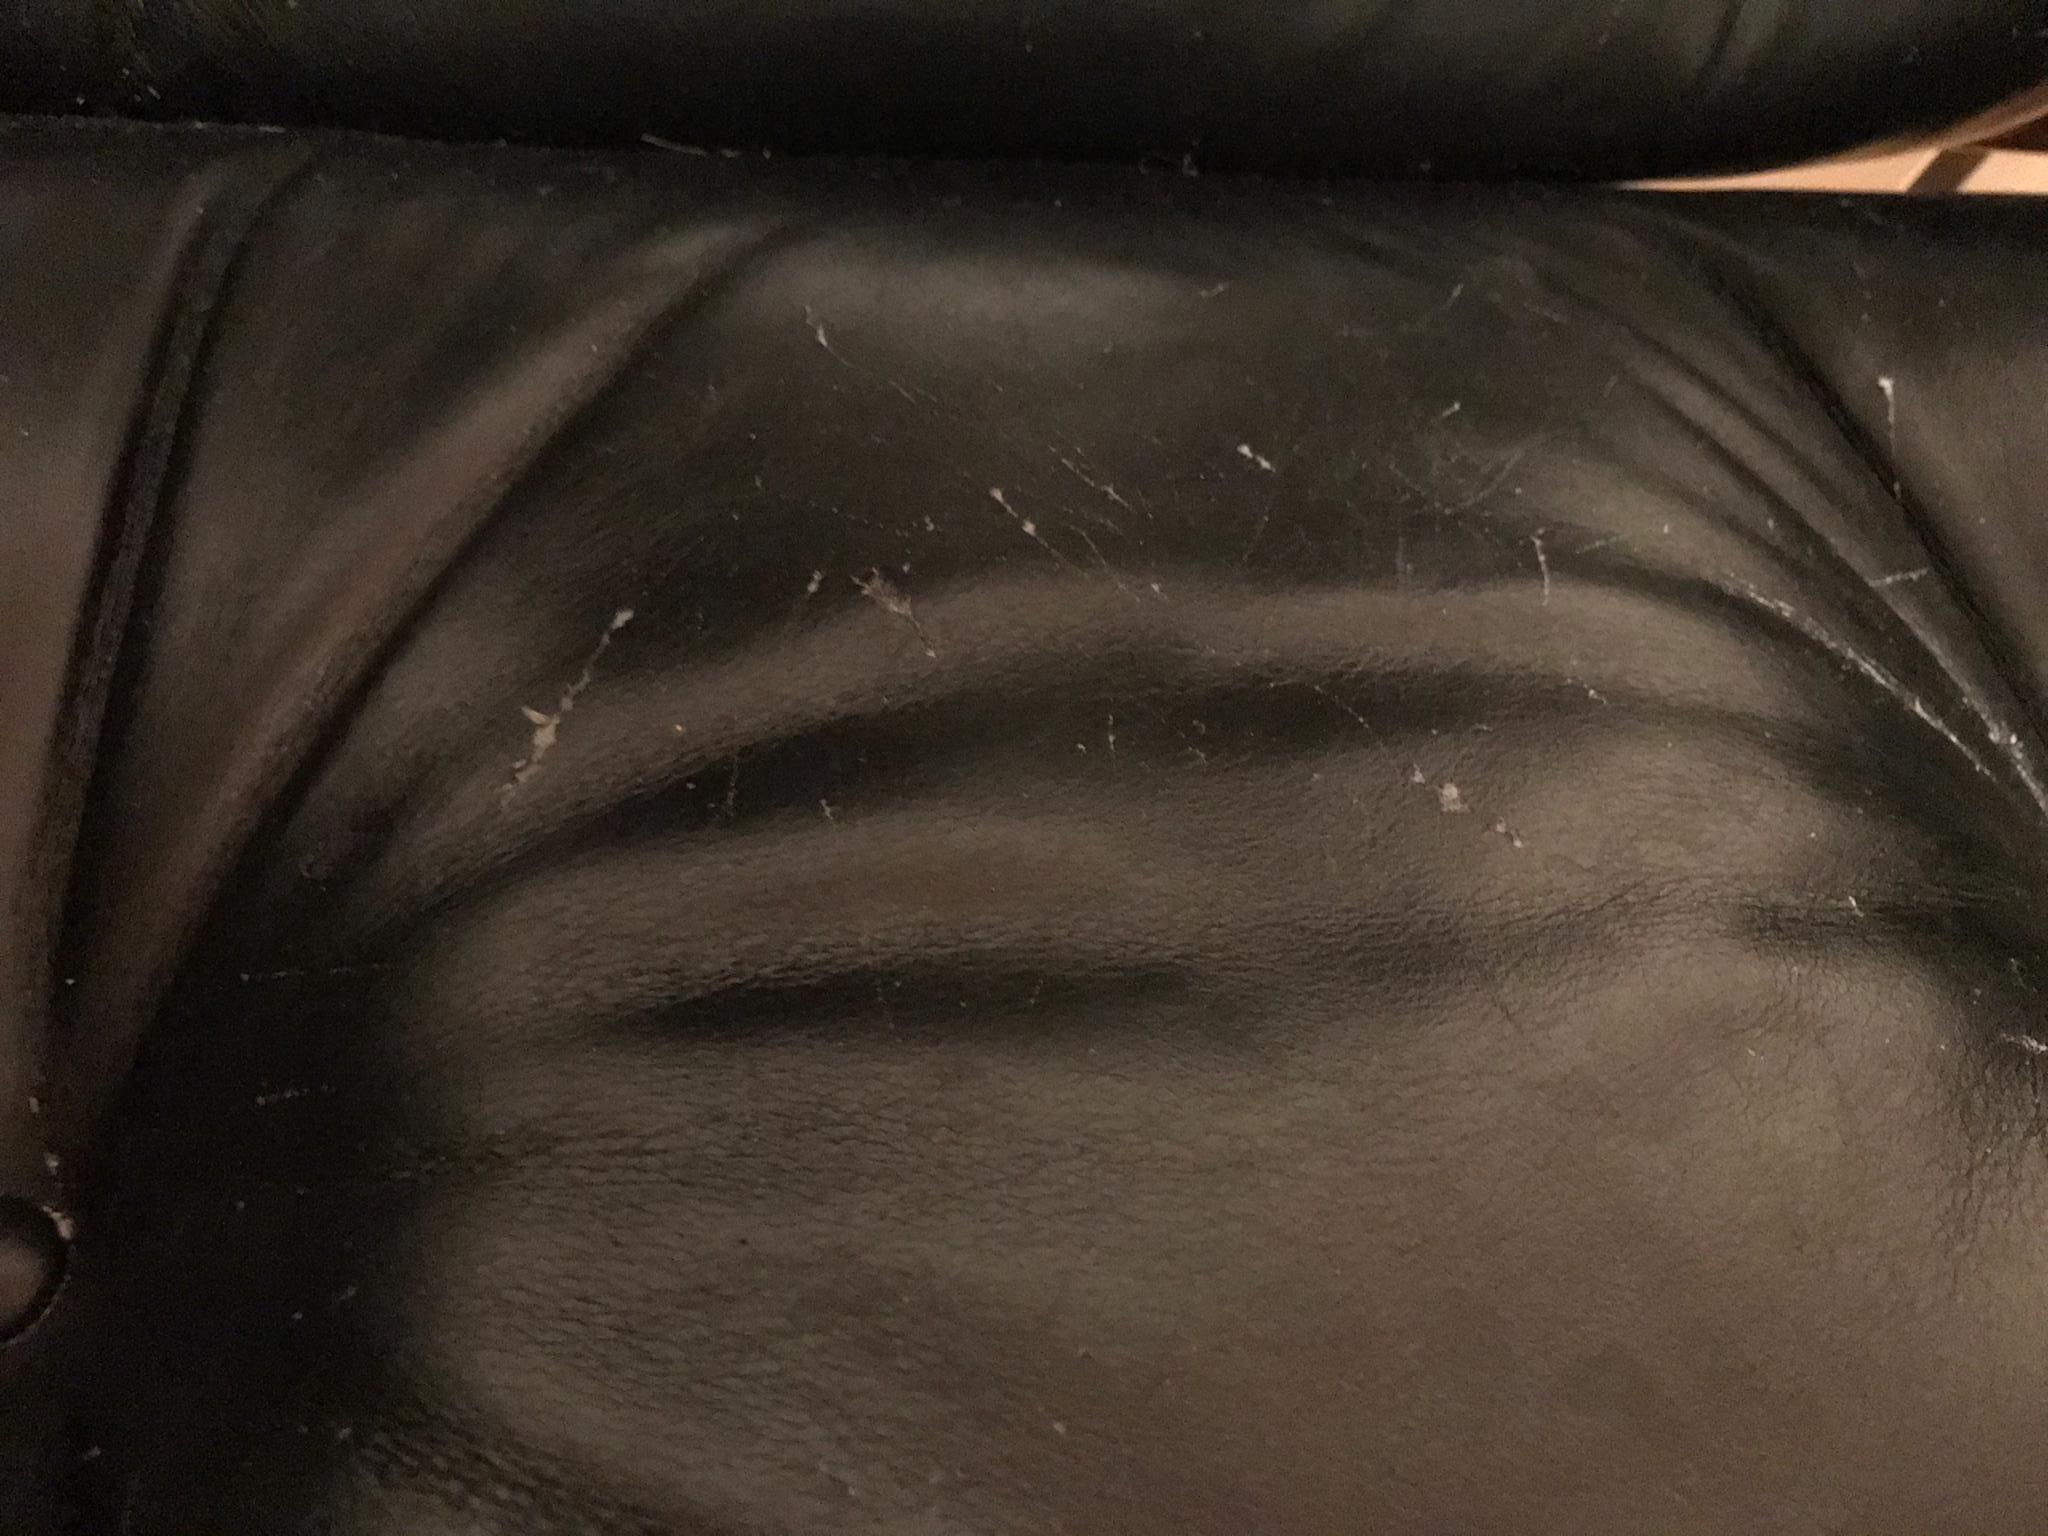 How to repair cat scratches on leather with olive oil